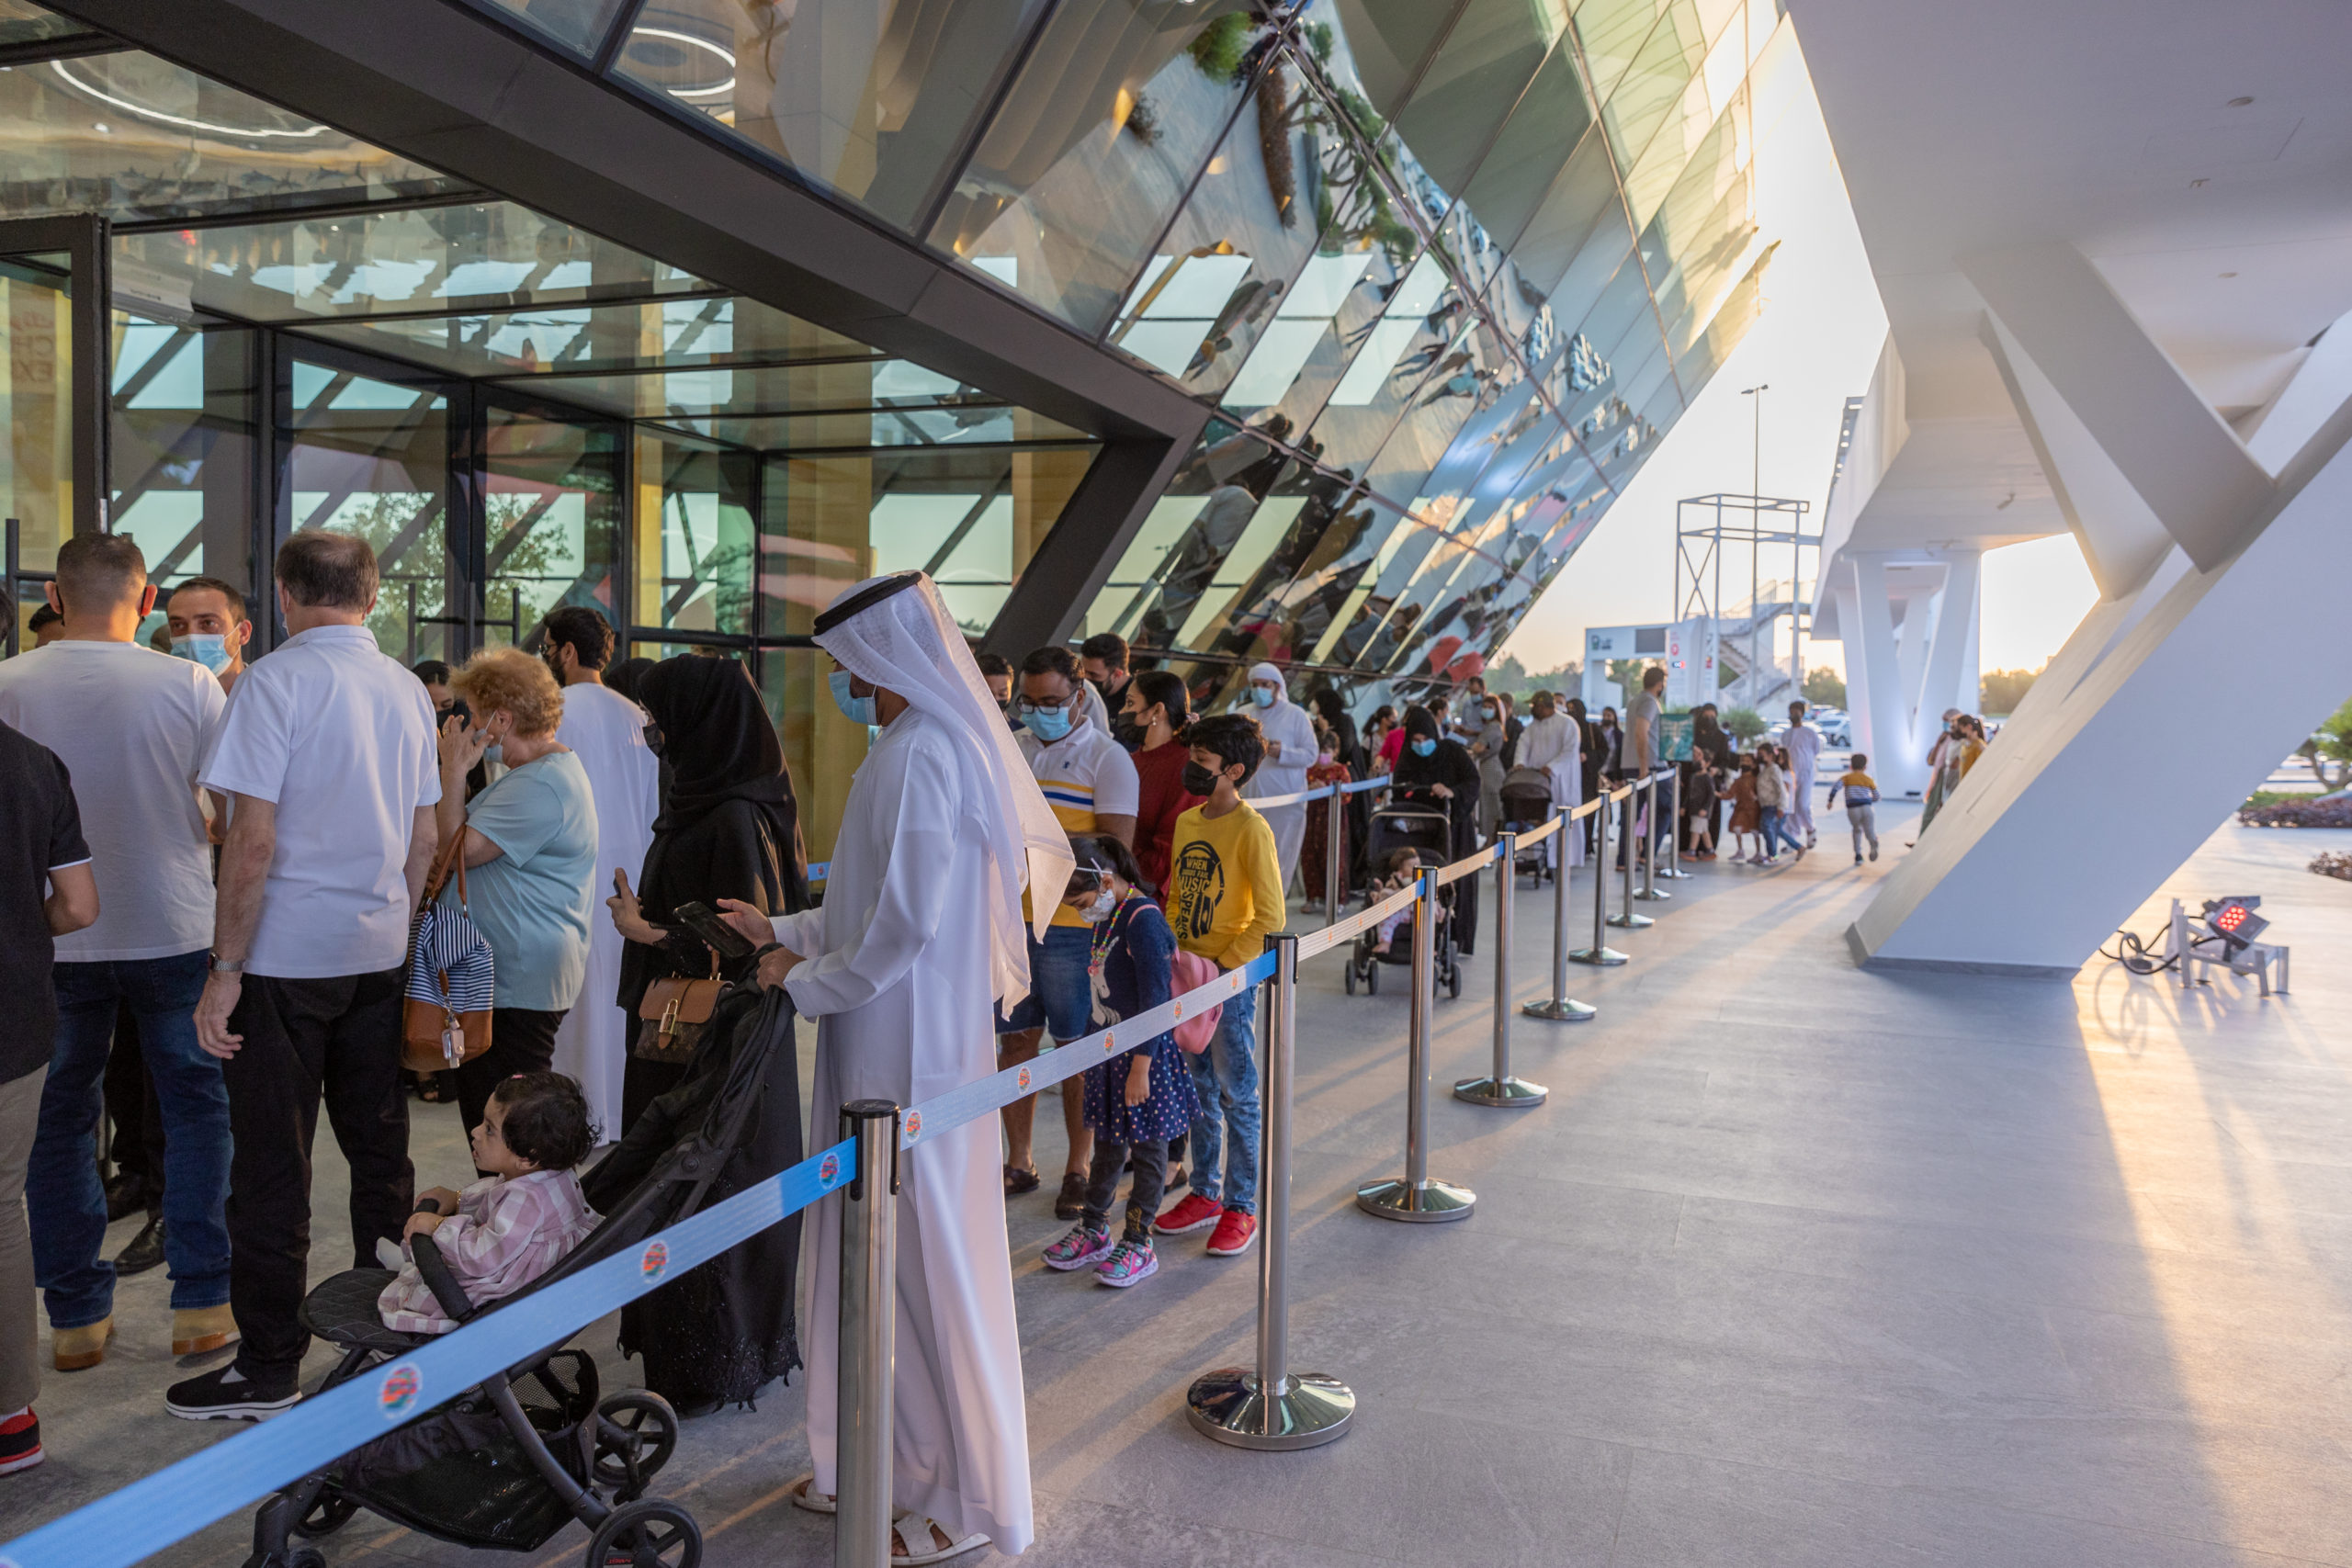 The largest aquarium in the Middle East welcomes visitors from all over the region